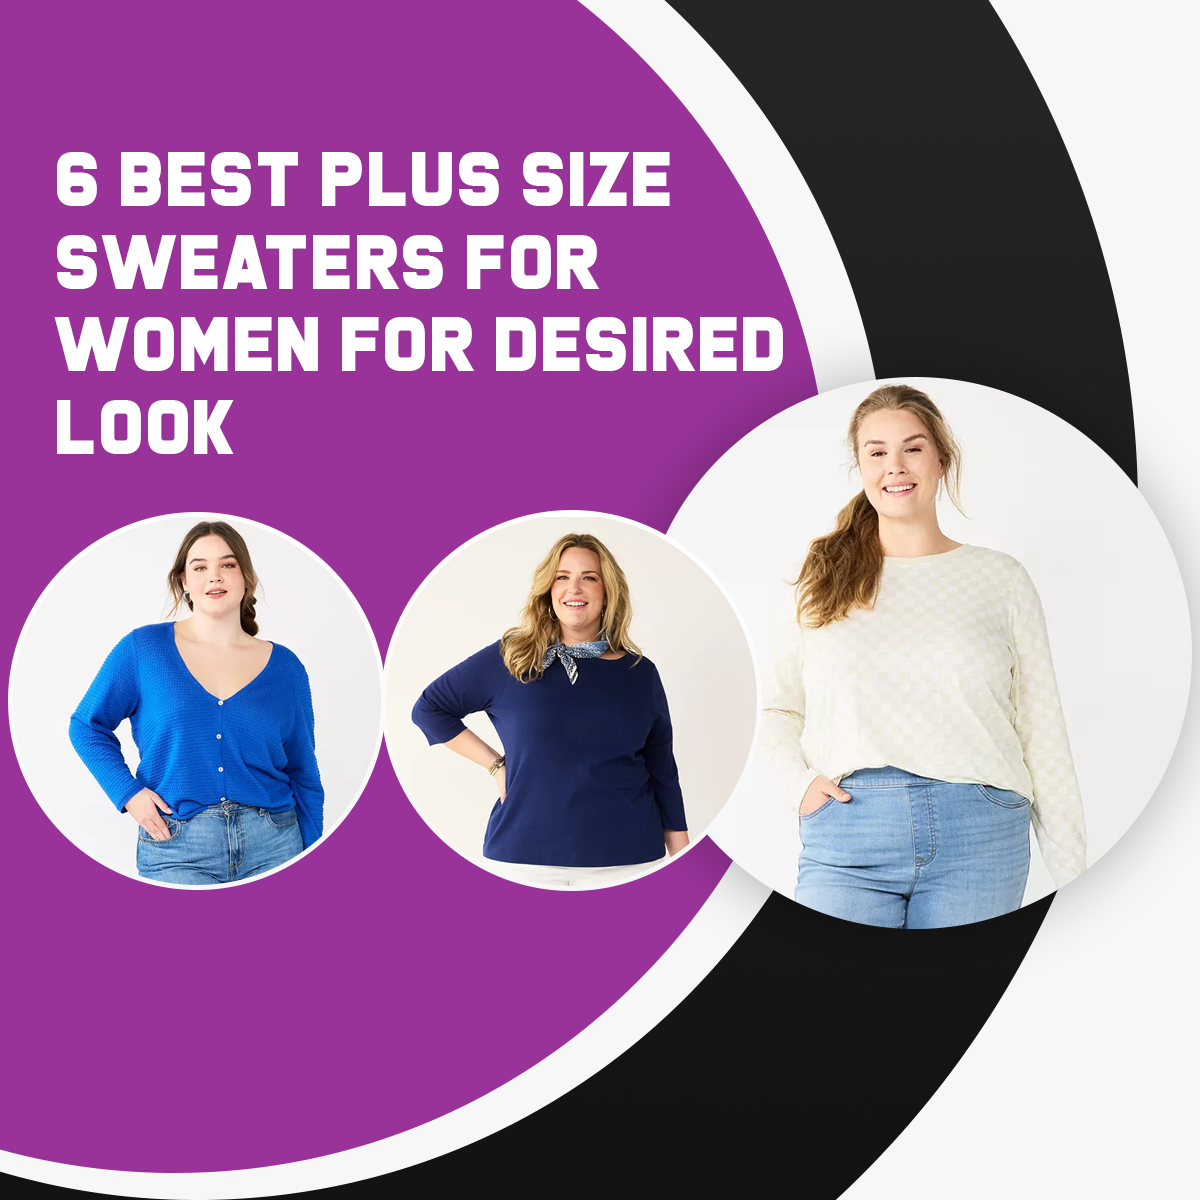 6 Best Plus Size Sweaters For Women For Desired Look